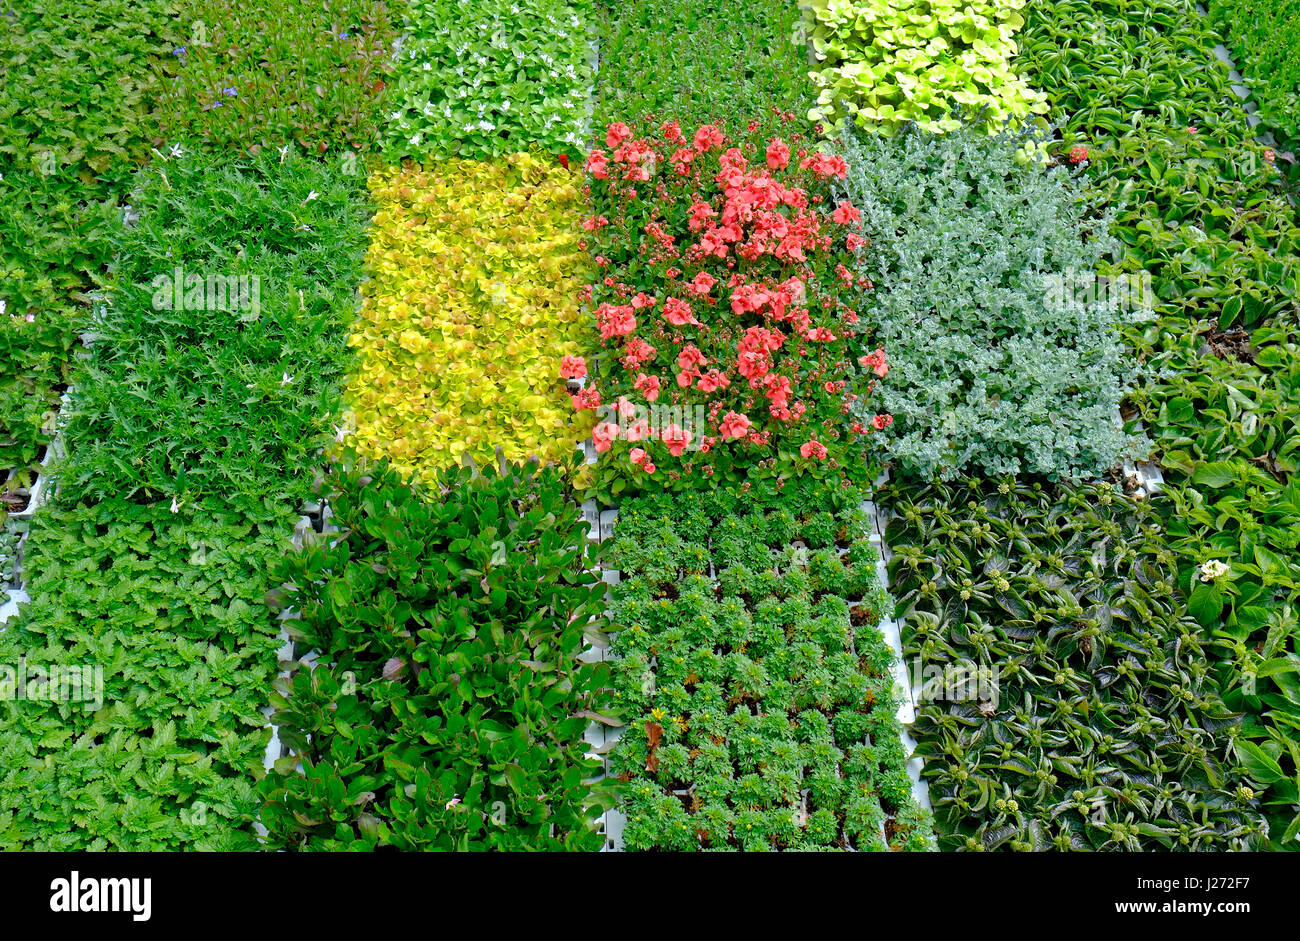 various plants growing in commercial nursery greenhouse interior, norfolk, england Stock Photo